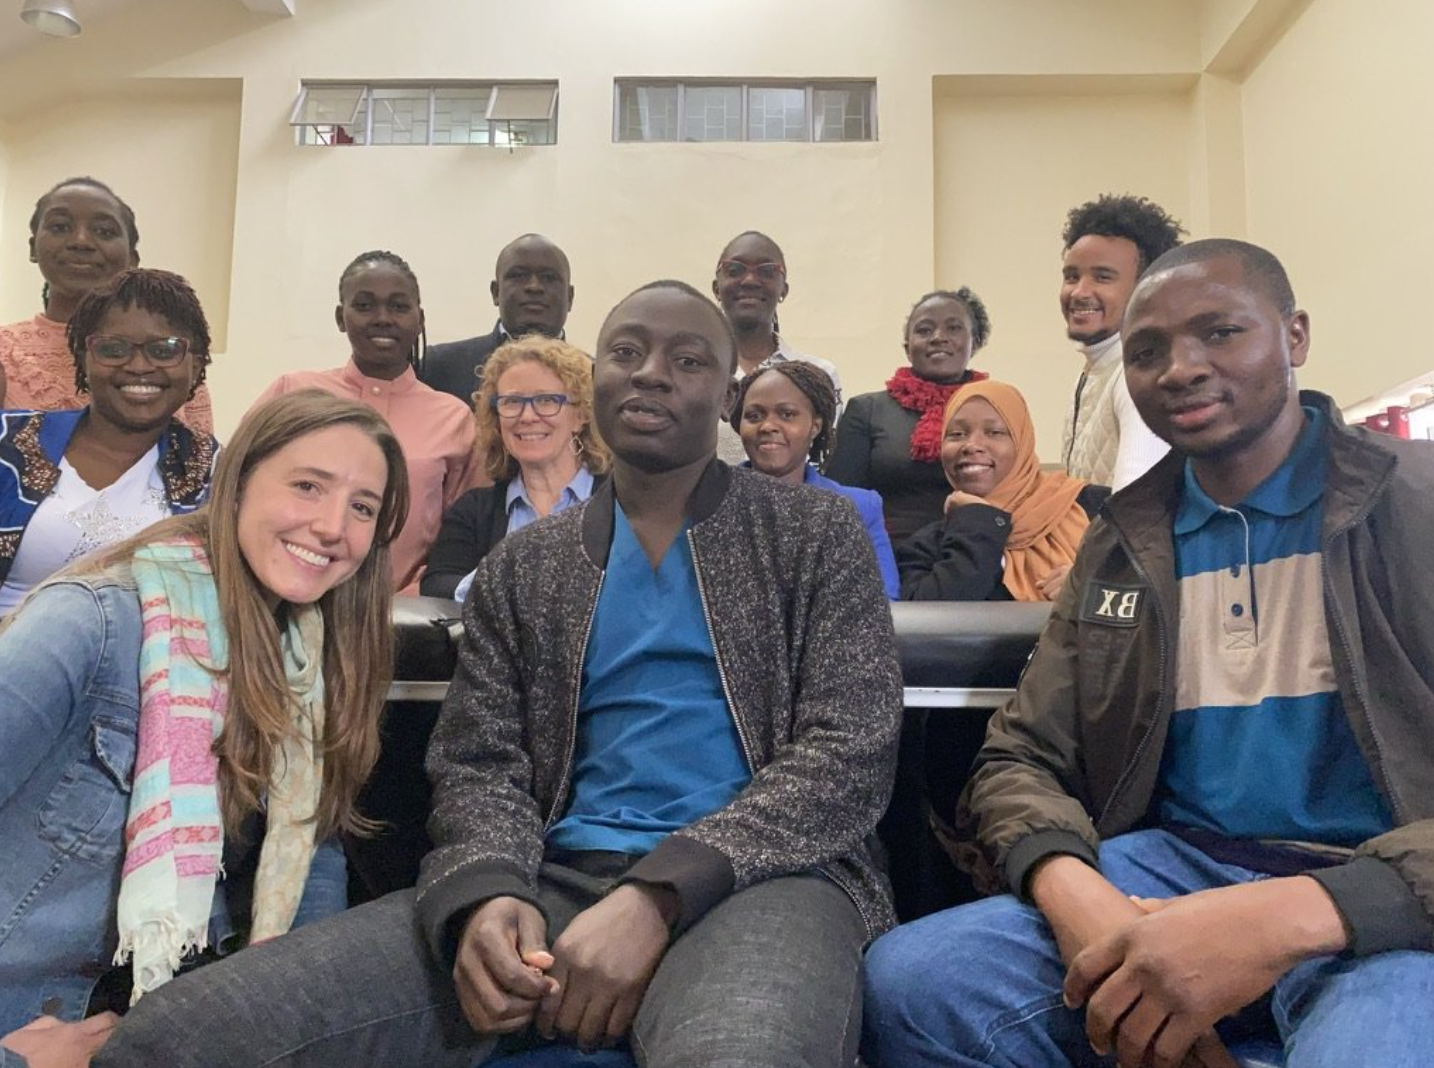 Jillian Caster, DPT ’08 (front right), and Associate Professor Michelle “Missy” Criss (middle row, second from right) pose with physiotherapists they taught in Nairobi, Kenya. (Photo courtesy of Michelle Criss) 